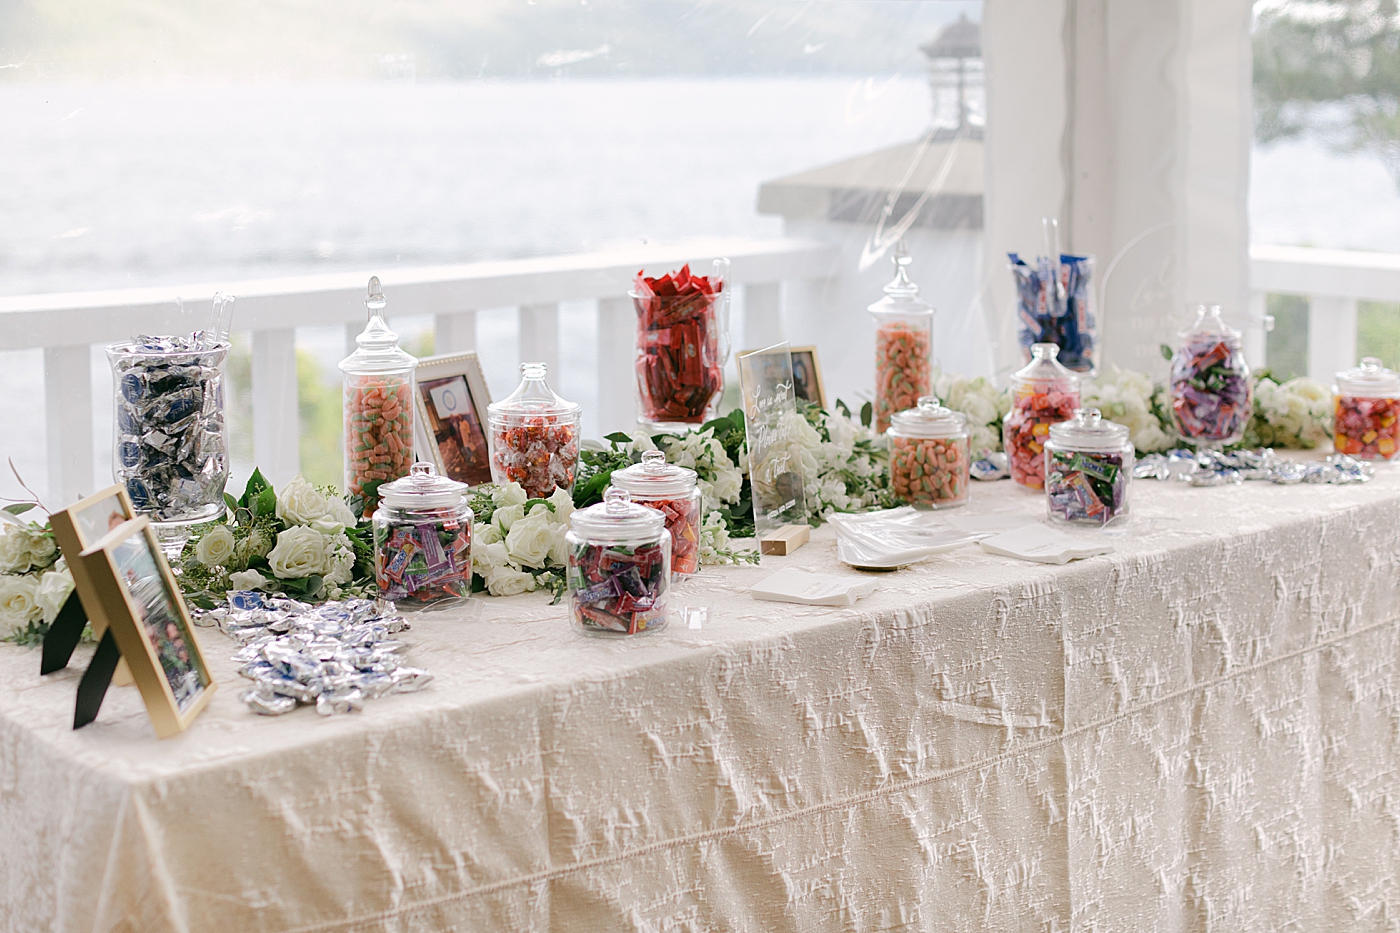 Reception candy table details | Image by Hope Helmuth Photography